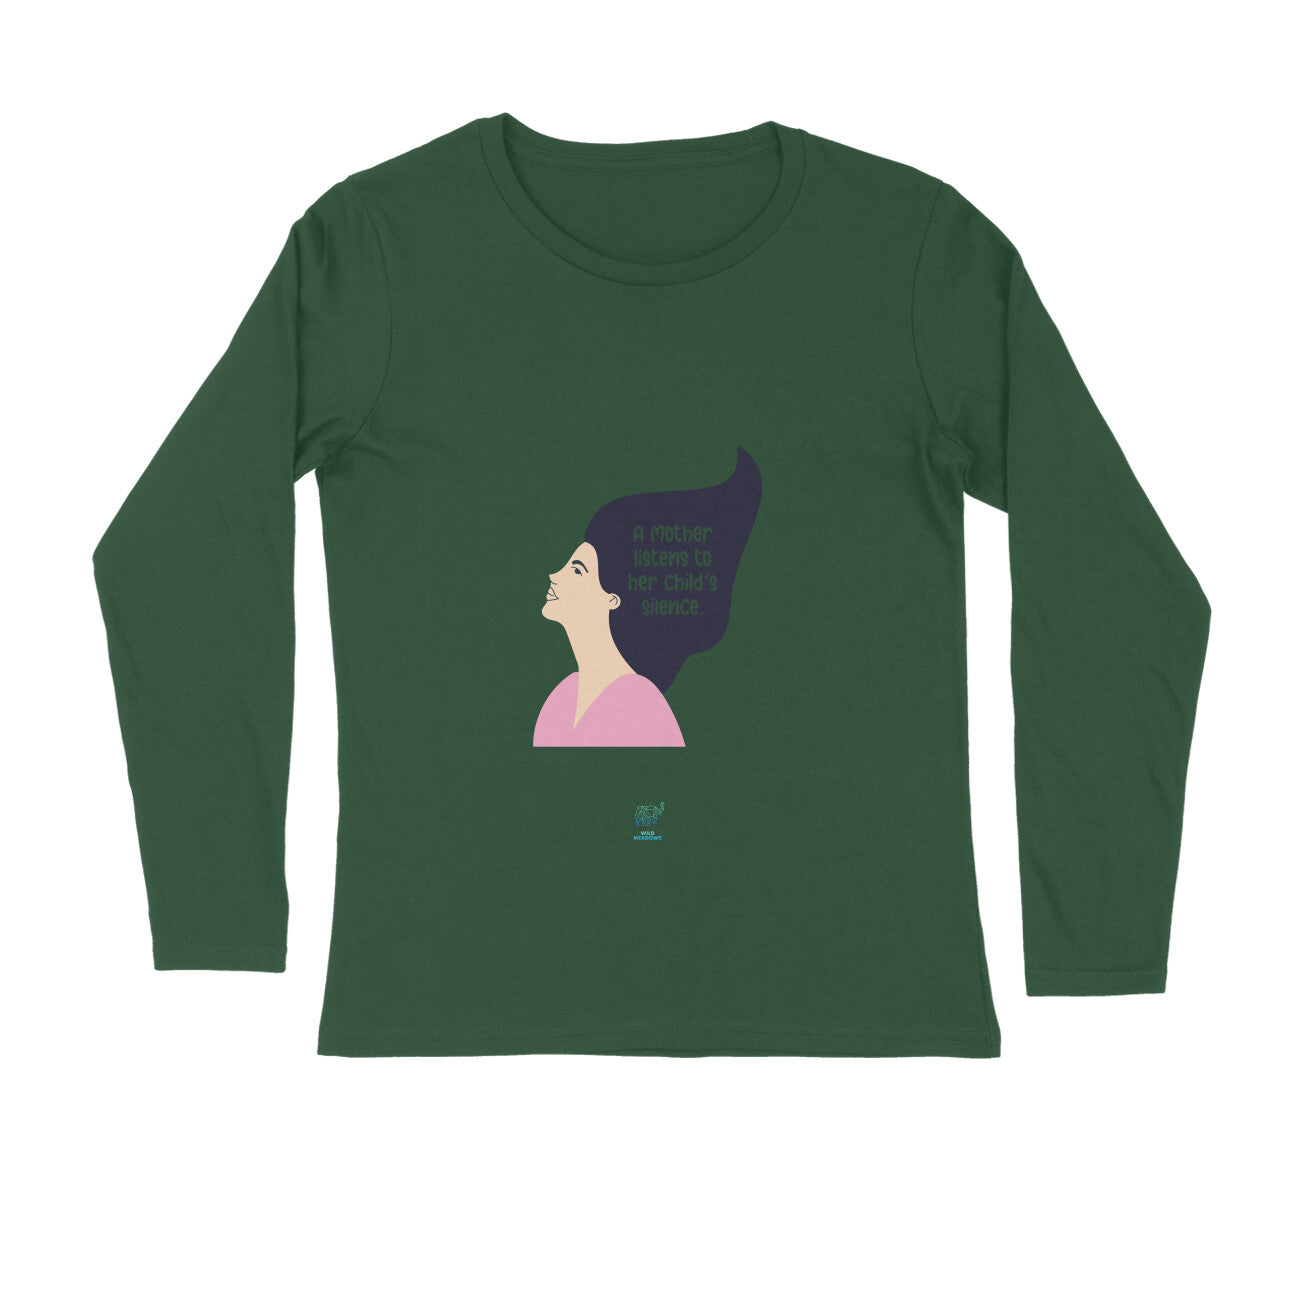 A mother listens to her child's silence - Long Sleeve Unisex Tee